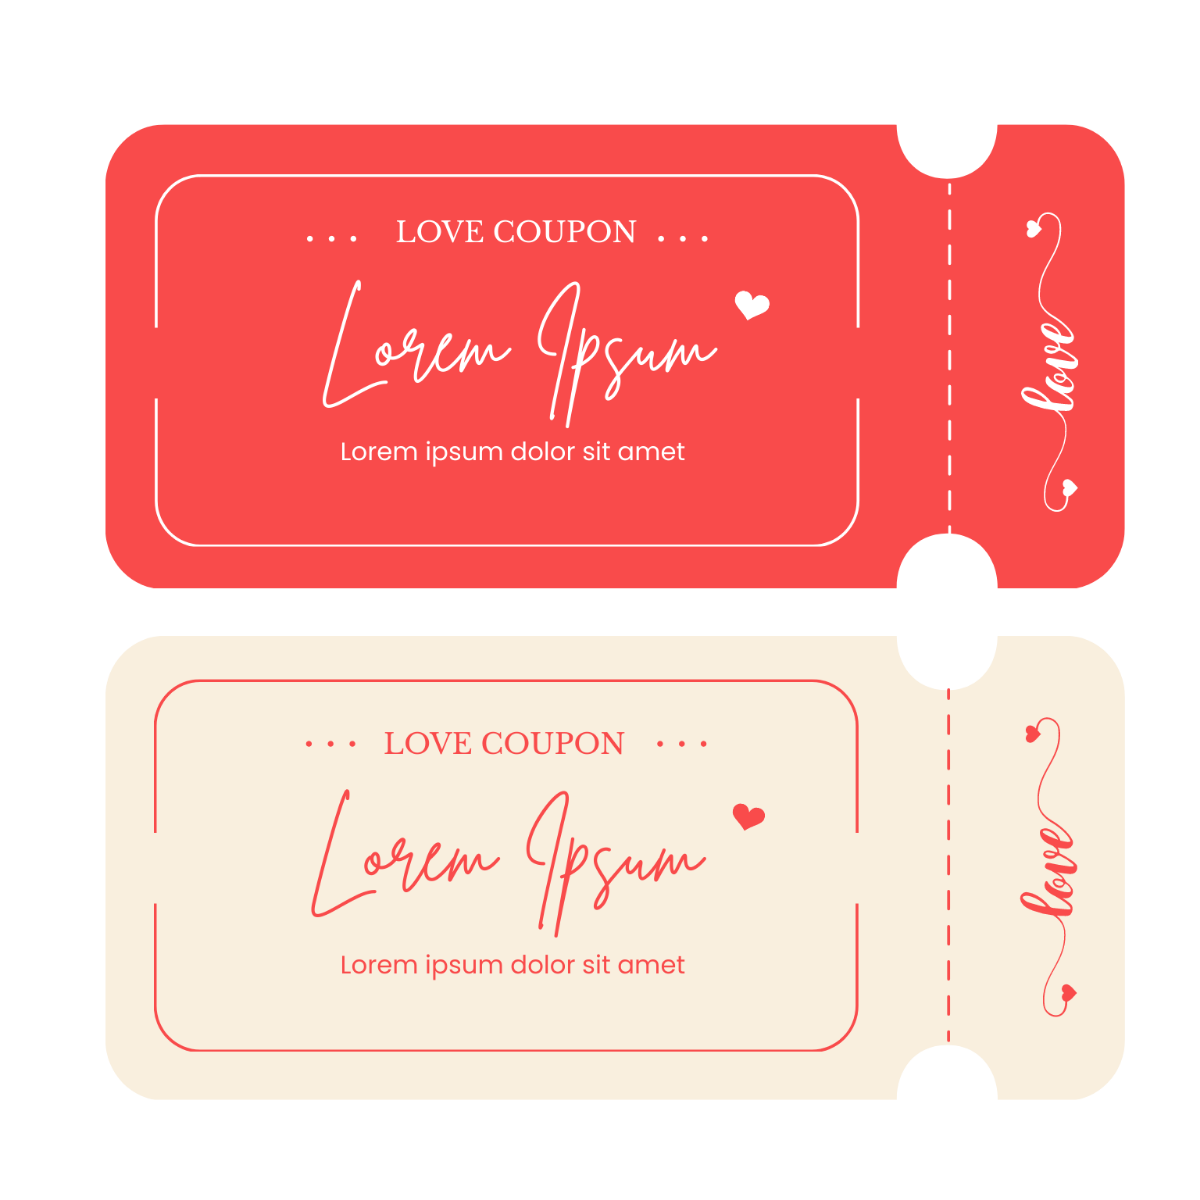 Love Coupon Vector Template